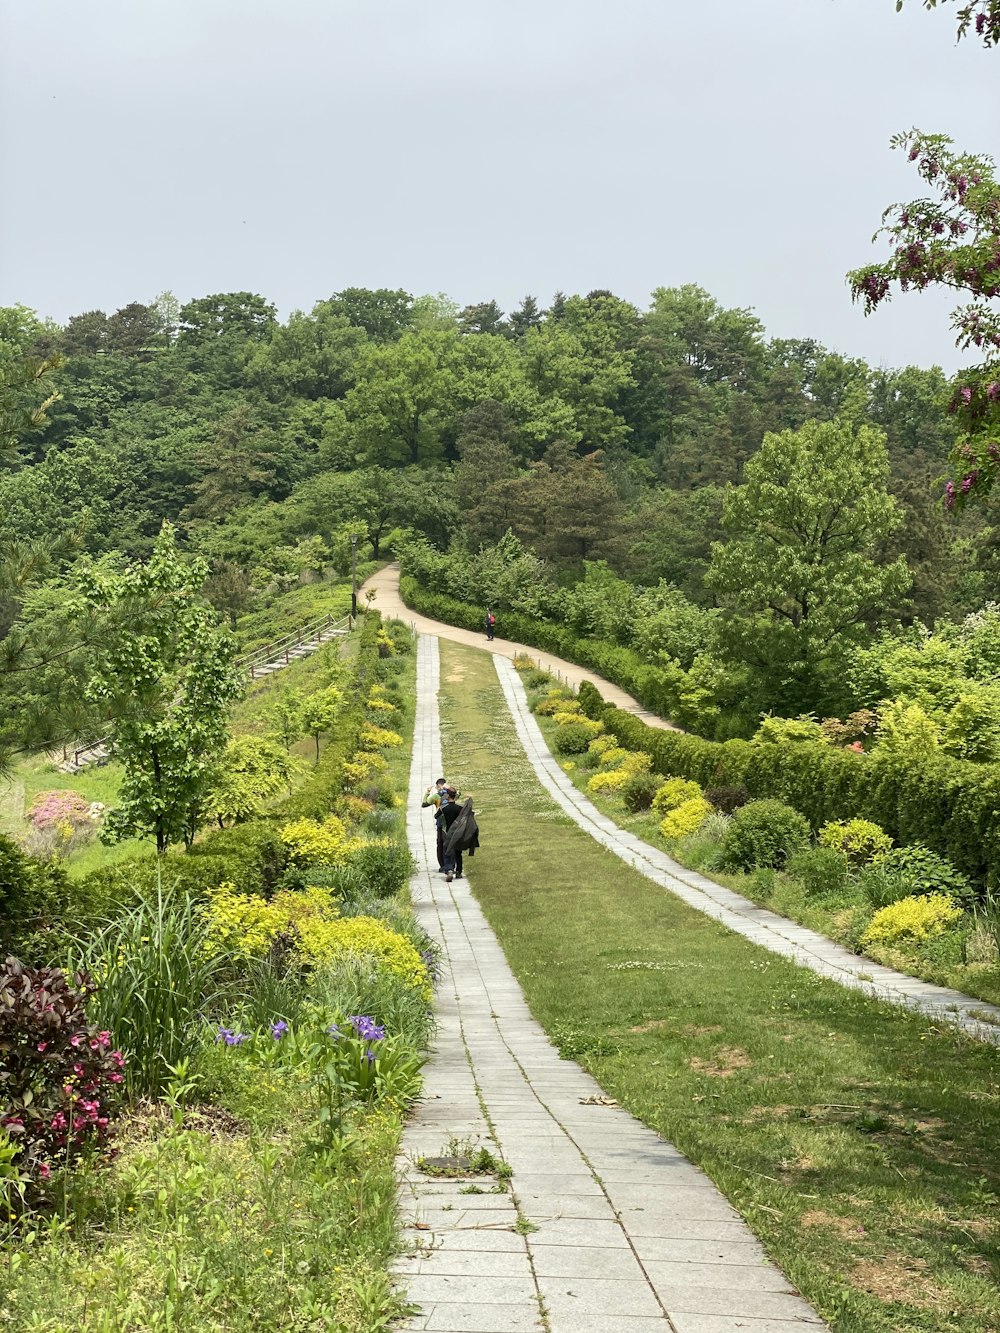 person walking on pathway between green trees during daytime